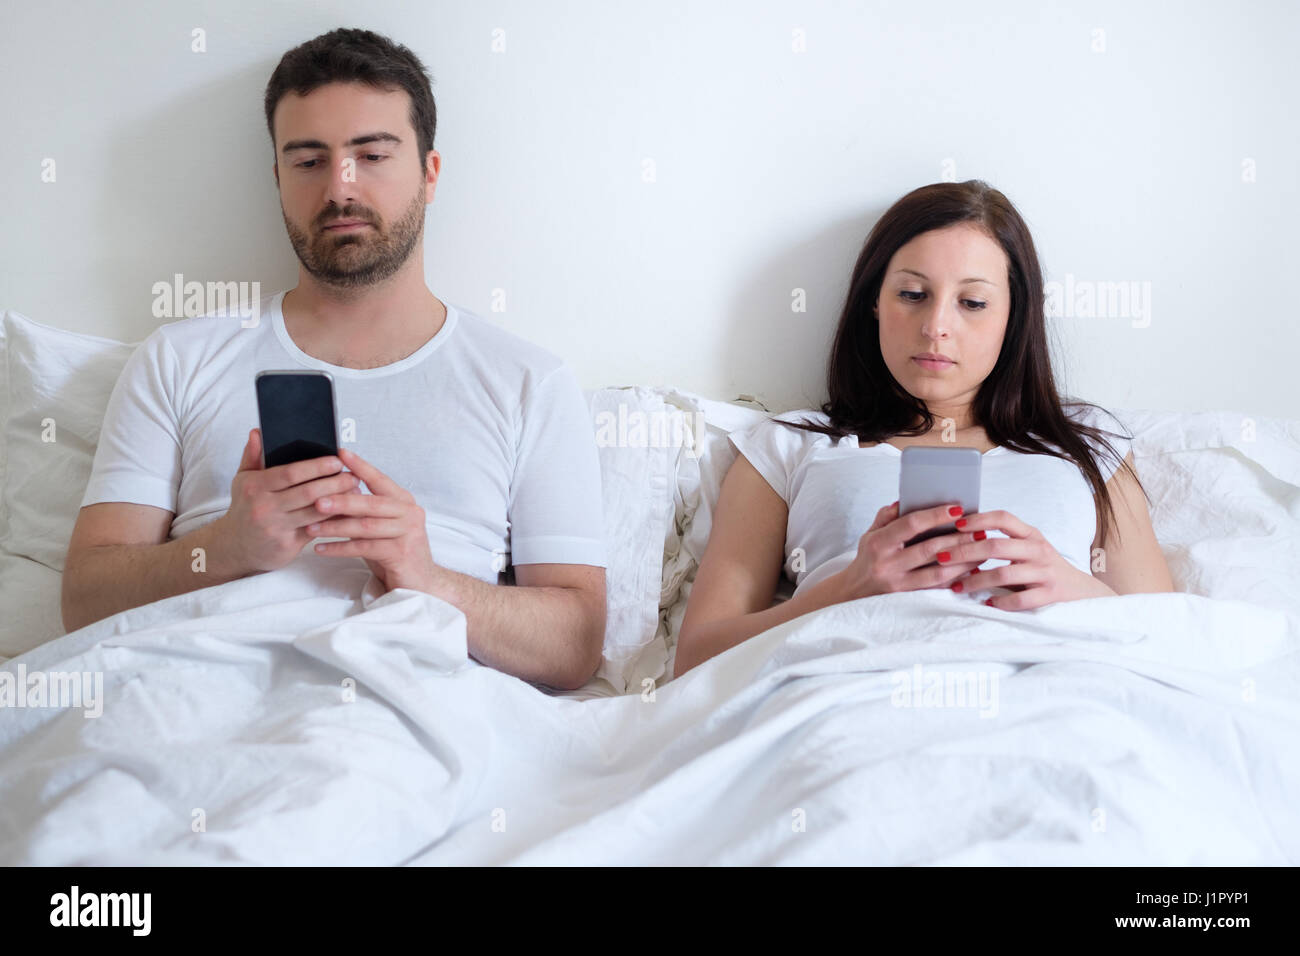 Bored and annoyed lovers couple ignoring themselves Stock Photo